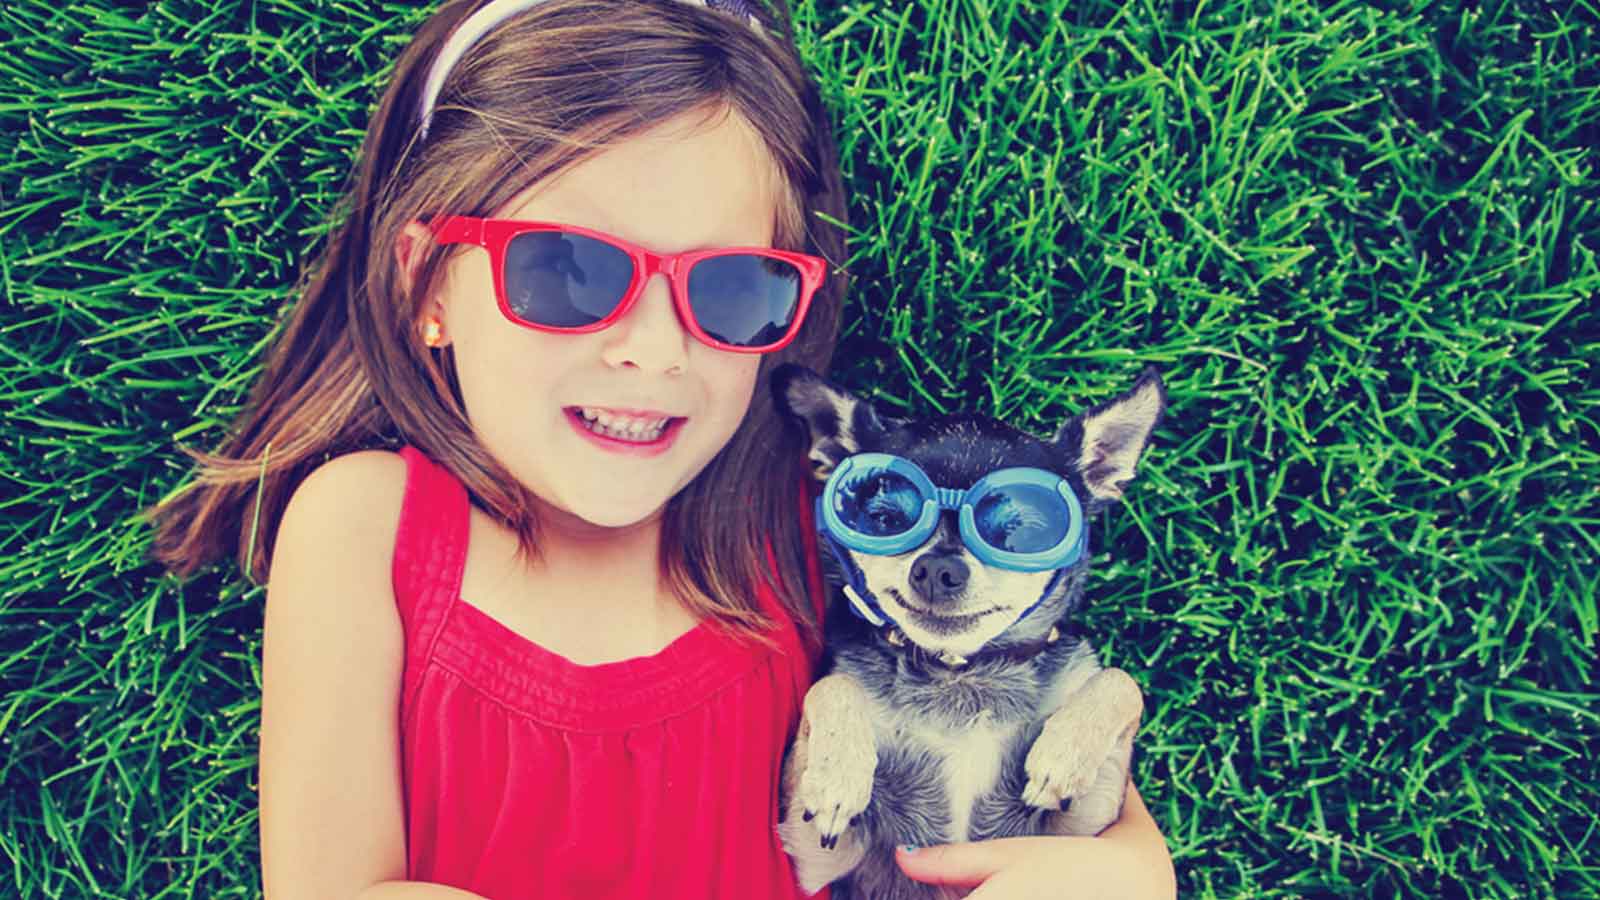 10 Things You Need To Survive the Summer With Little Ones